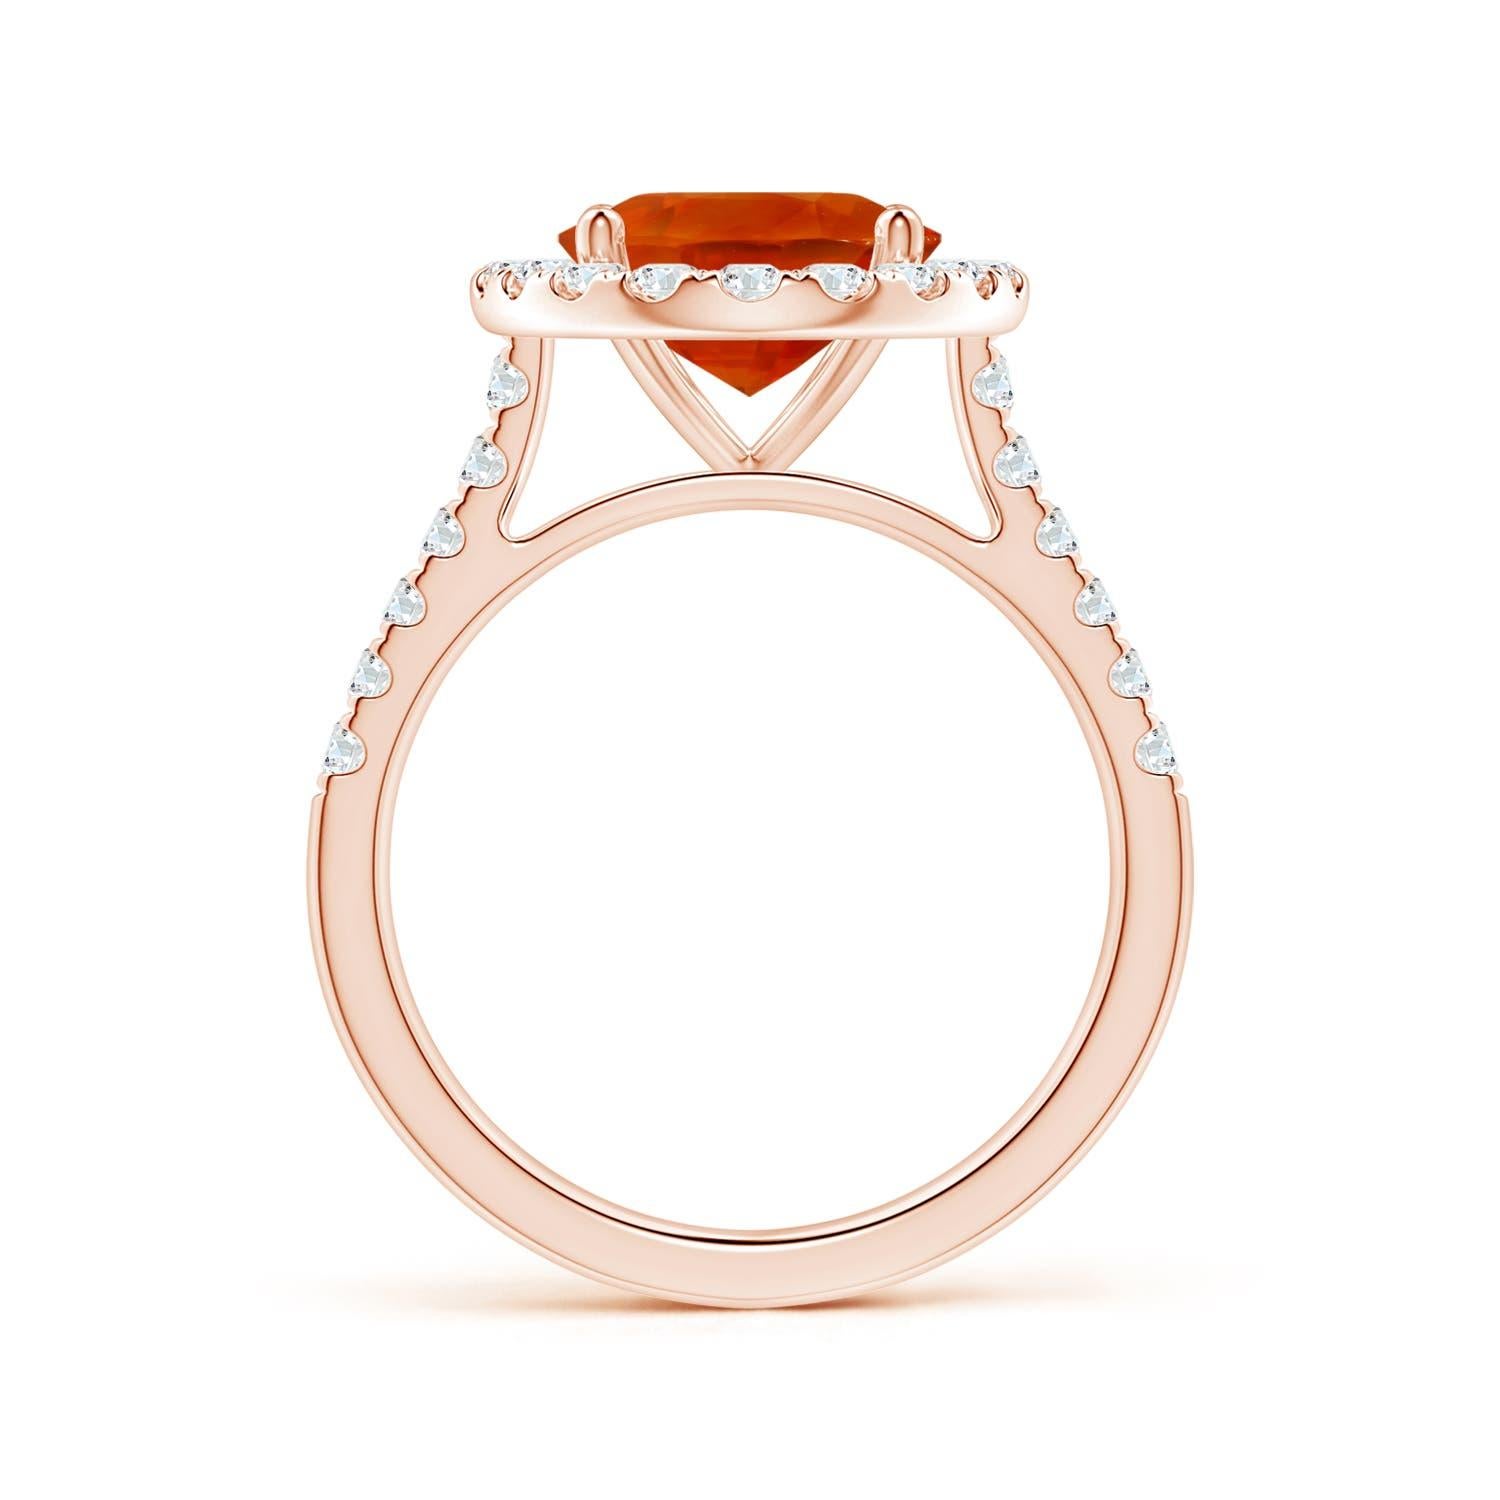 For Sale:  Angara Gia Certified Natural Orange Sapphire Diamond Halo Ring in Rose Gold 2